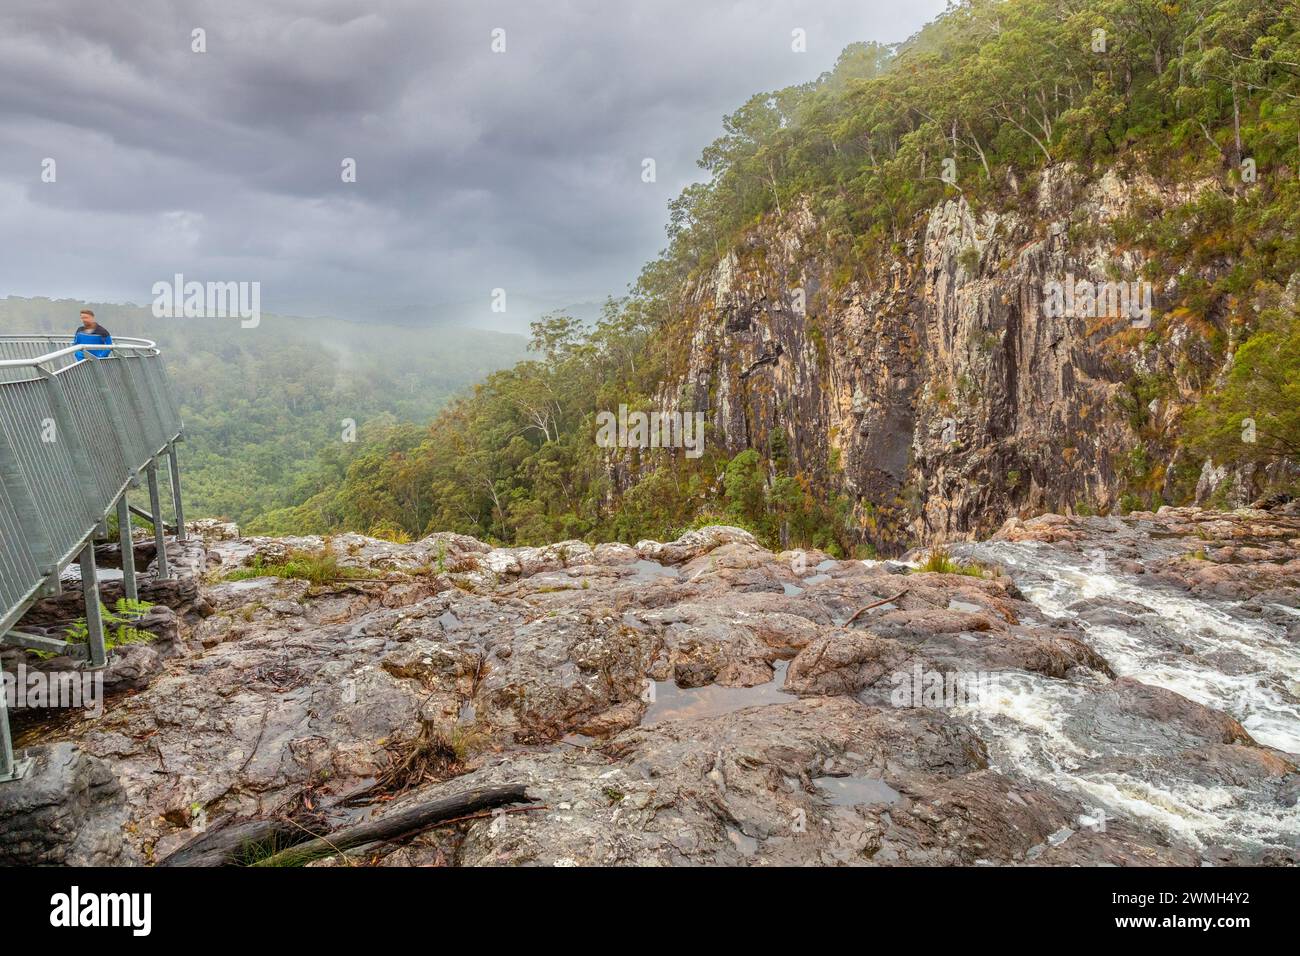 The top of Minyon Falls in Nightcap National Park near Alstonville, NSW, Australia. The park is home to a World Heritage-listed rain forest. Stock Photo